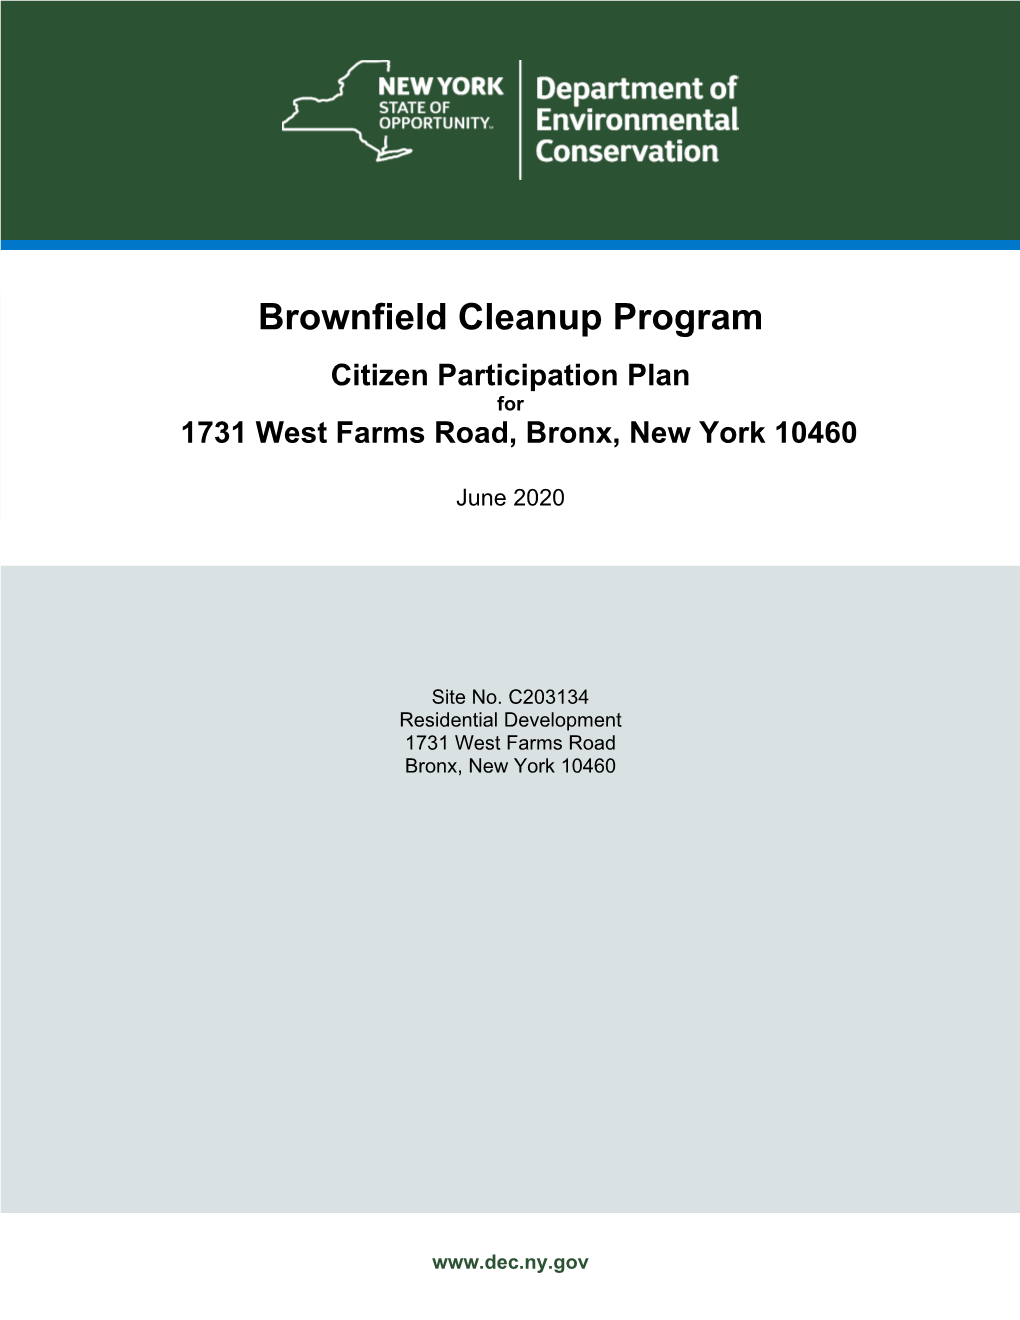 Brownfield Cleanup Program Citizen Participation Plan for 1731 West Farms Road, Bronx, New York 10460